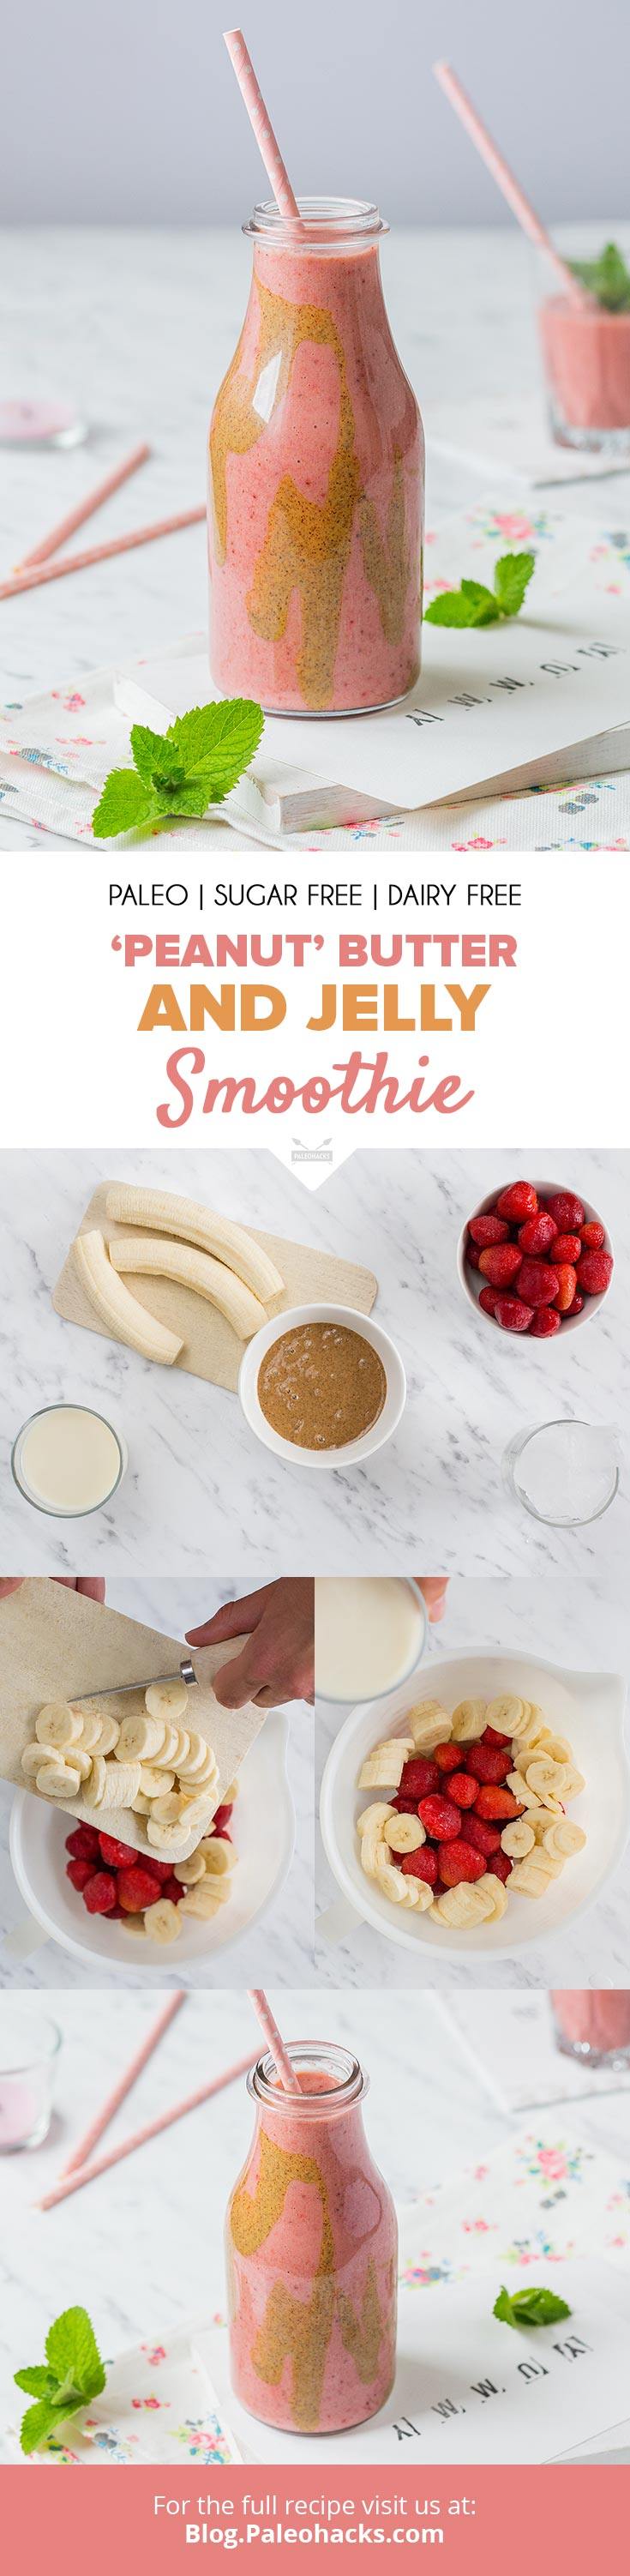 Peanut Butter and Jelly Smoothie Recipe